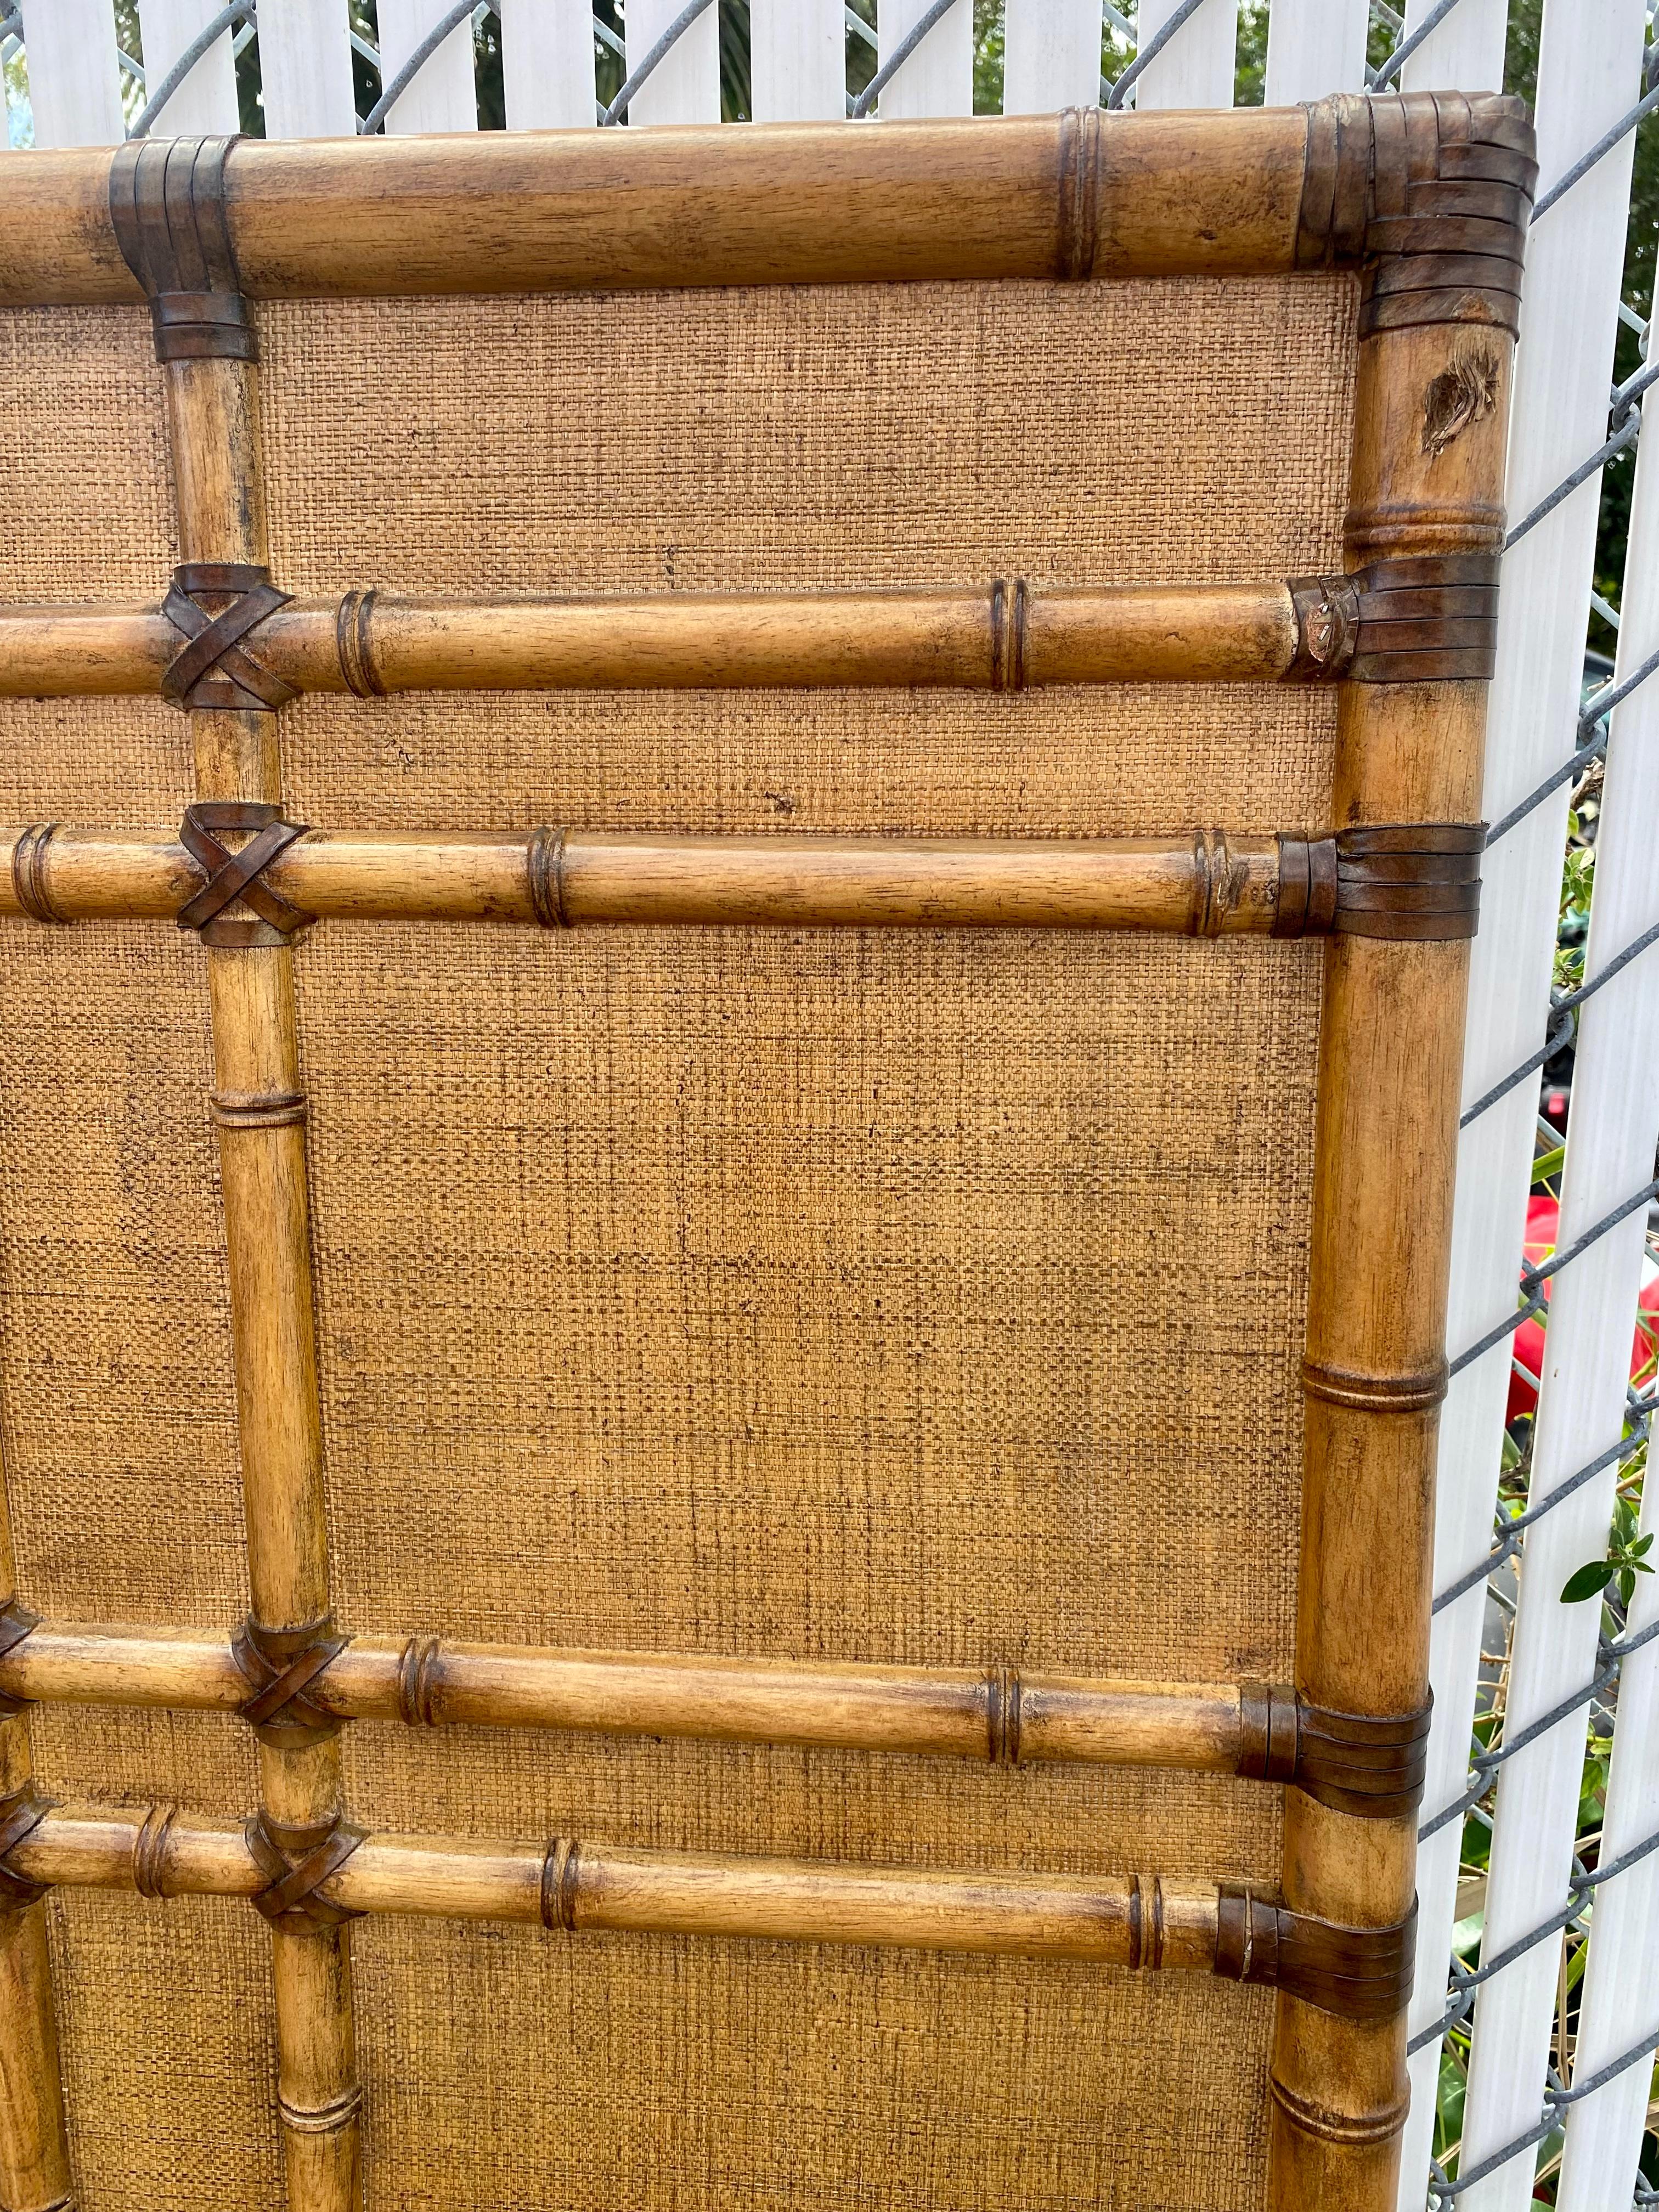 1990s Faux Rattan Bamboo Cane Leather Textured King Headboard In Good Condition For Sale In Fort Lauderdale, FL